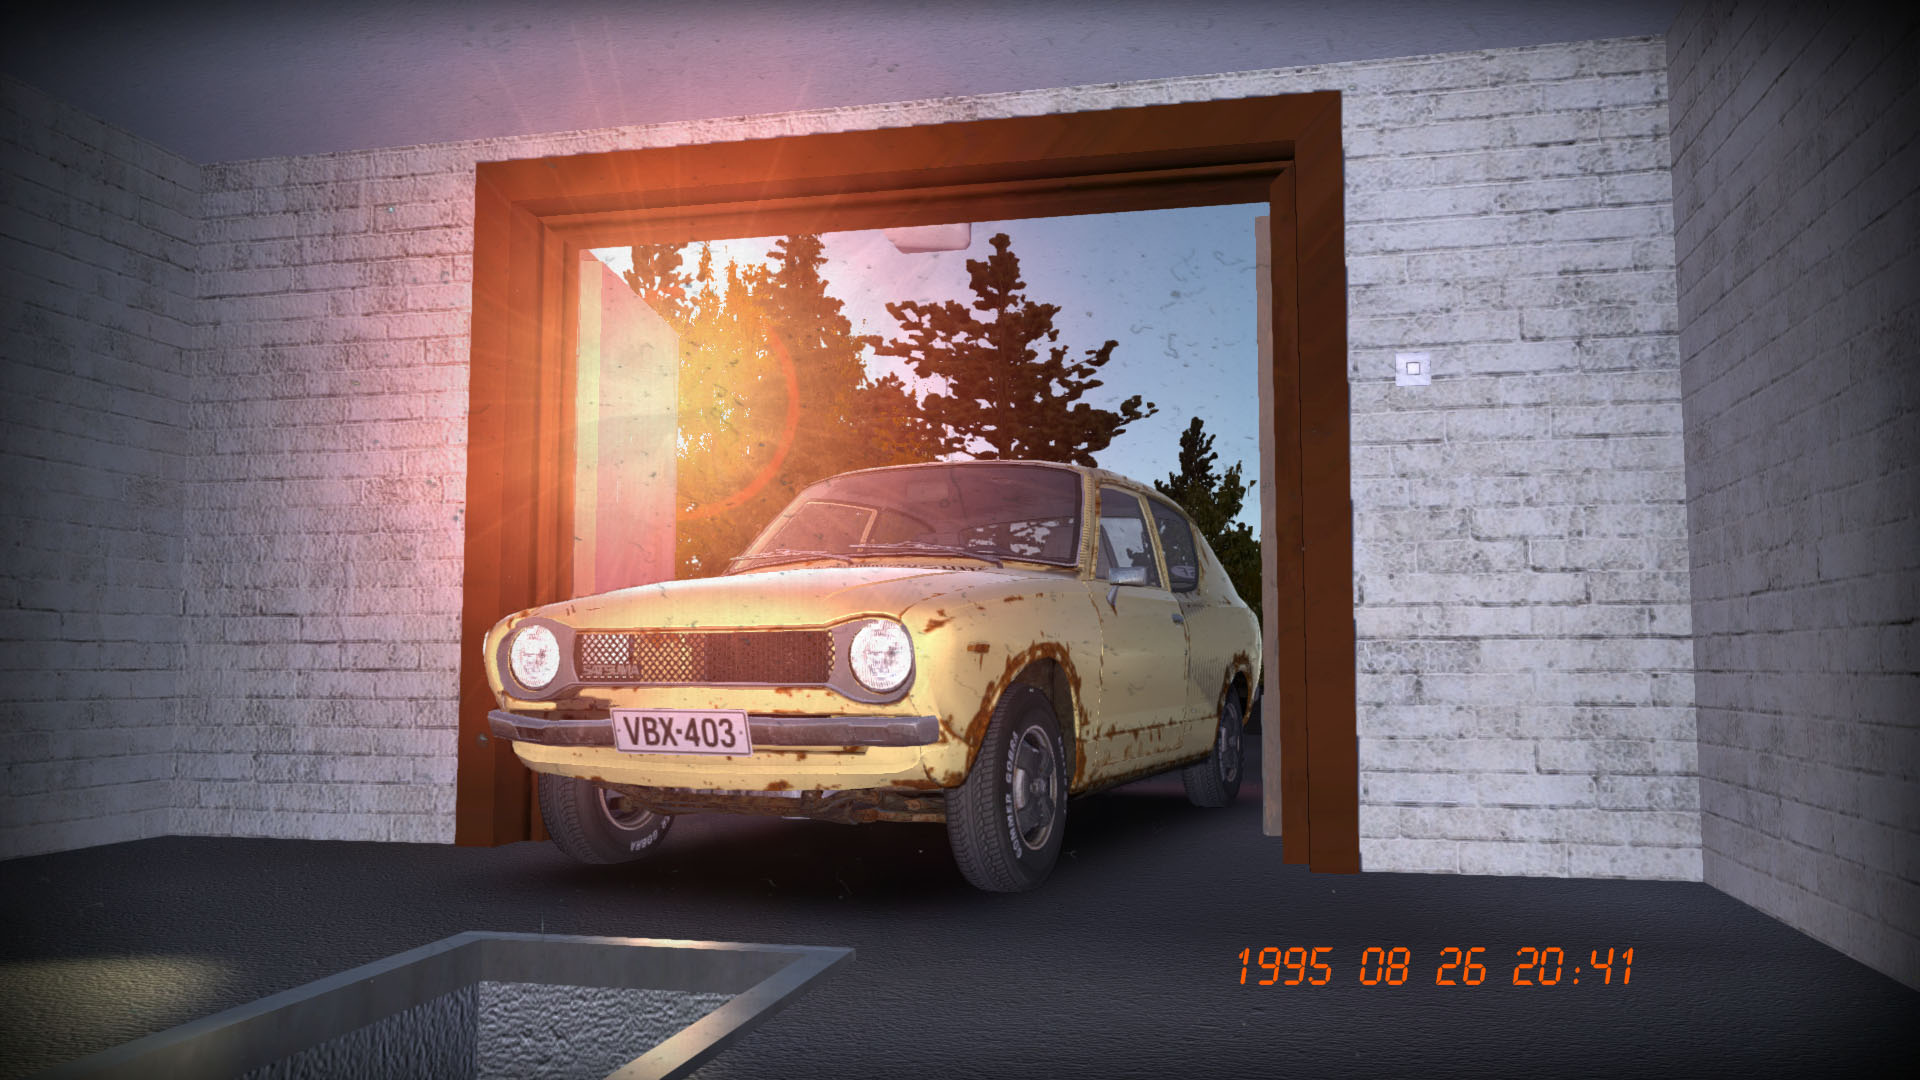 My Summer Car - How to take good photos?